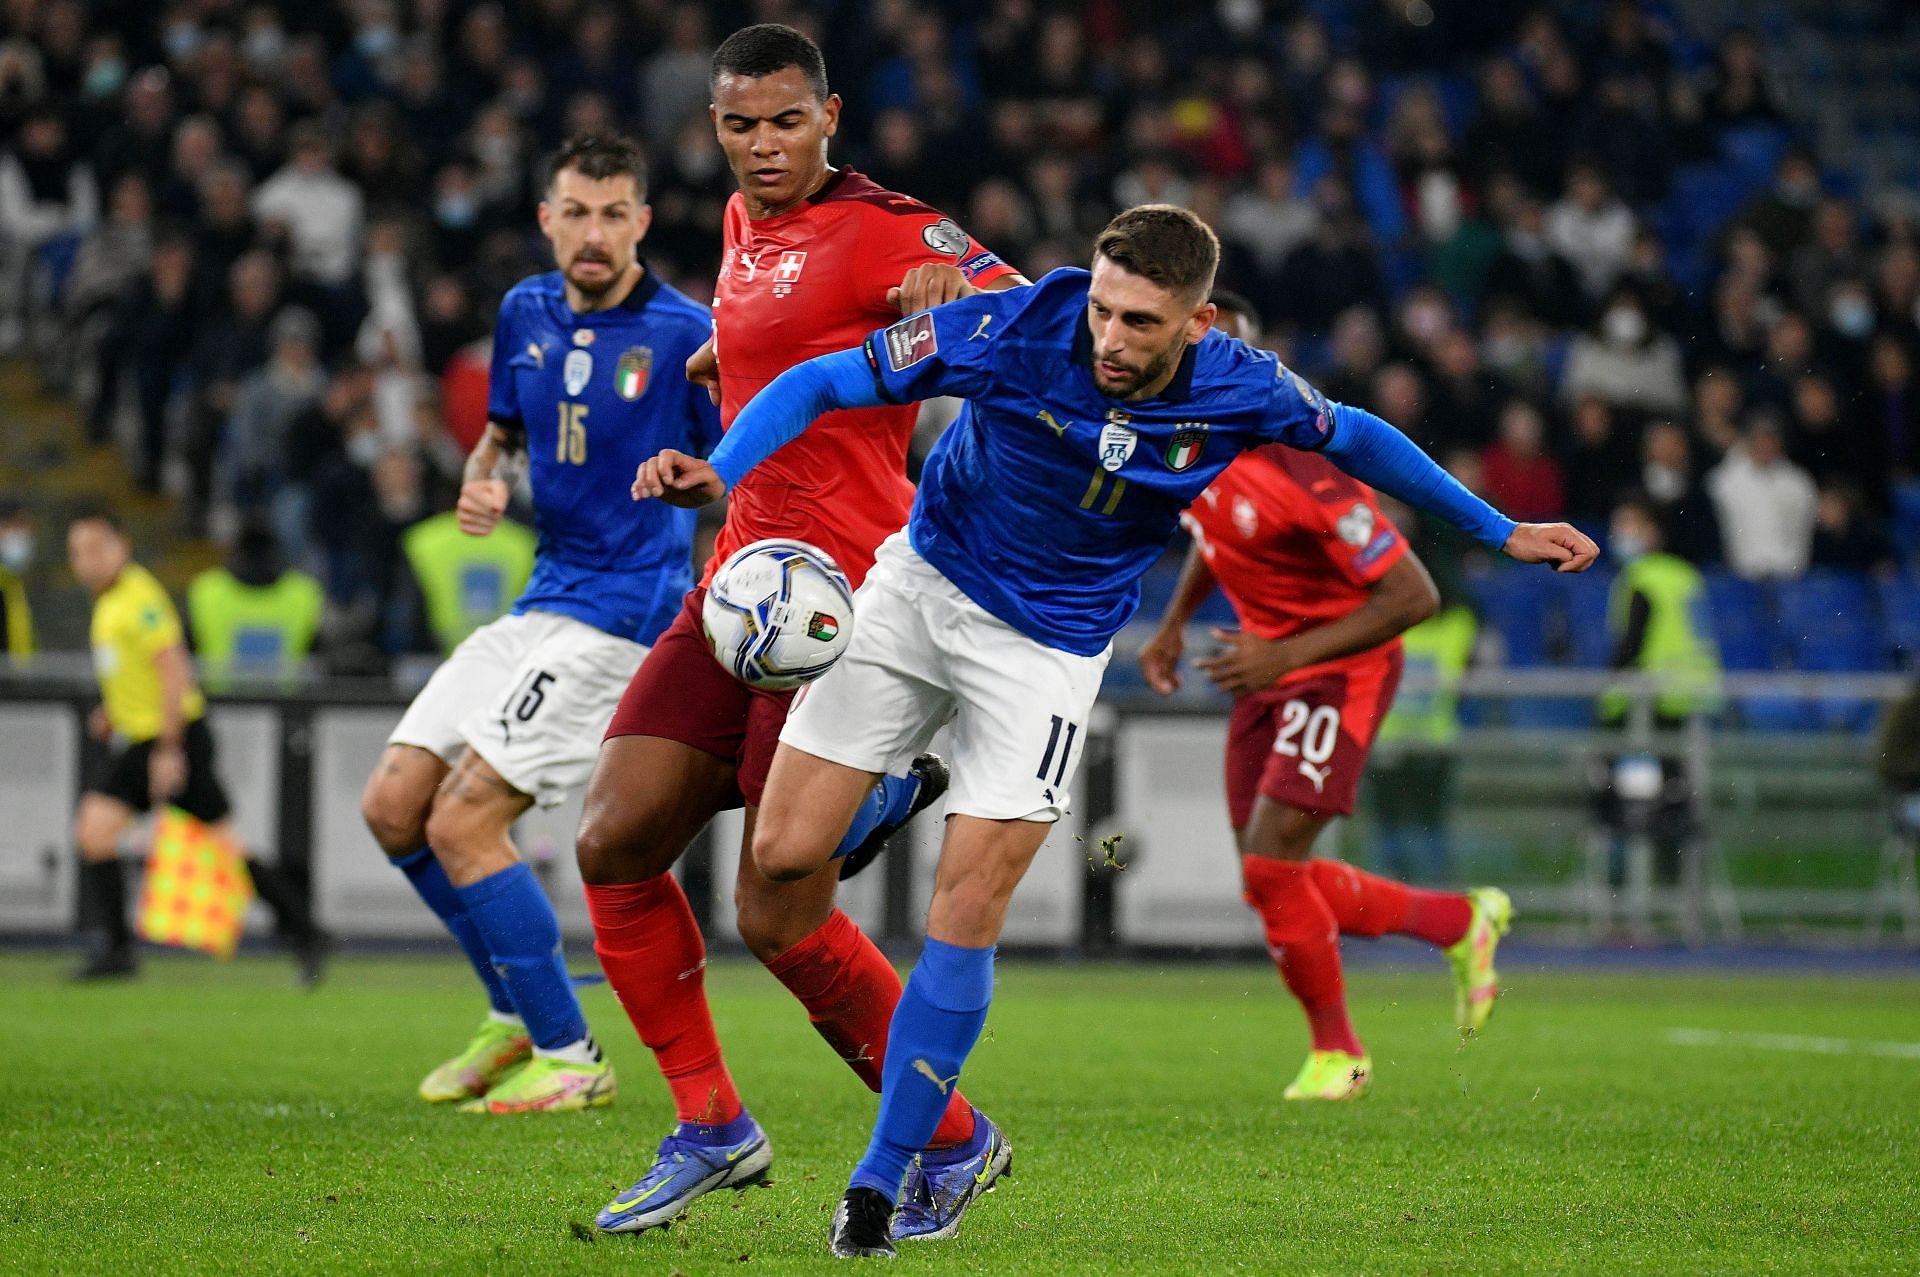 Italy take a trip to Windsor Park Stadium to face Northern Ireland